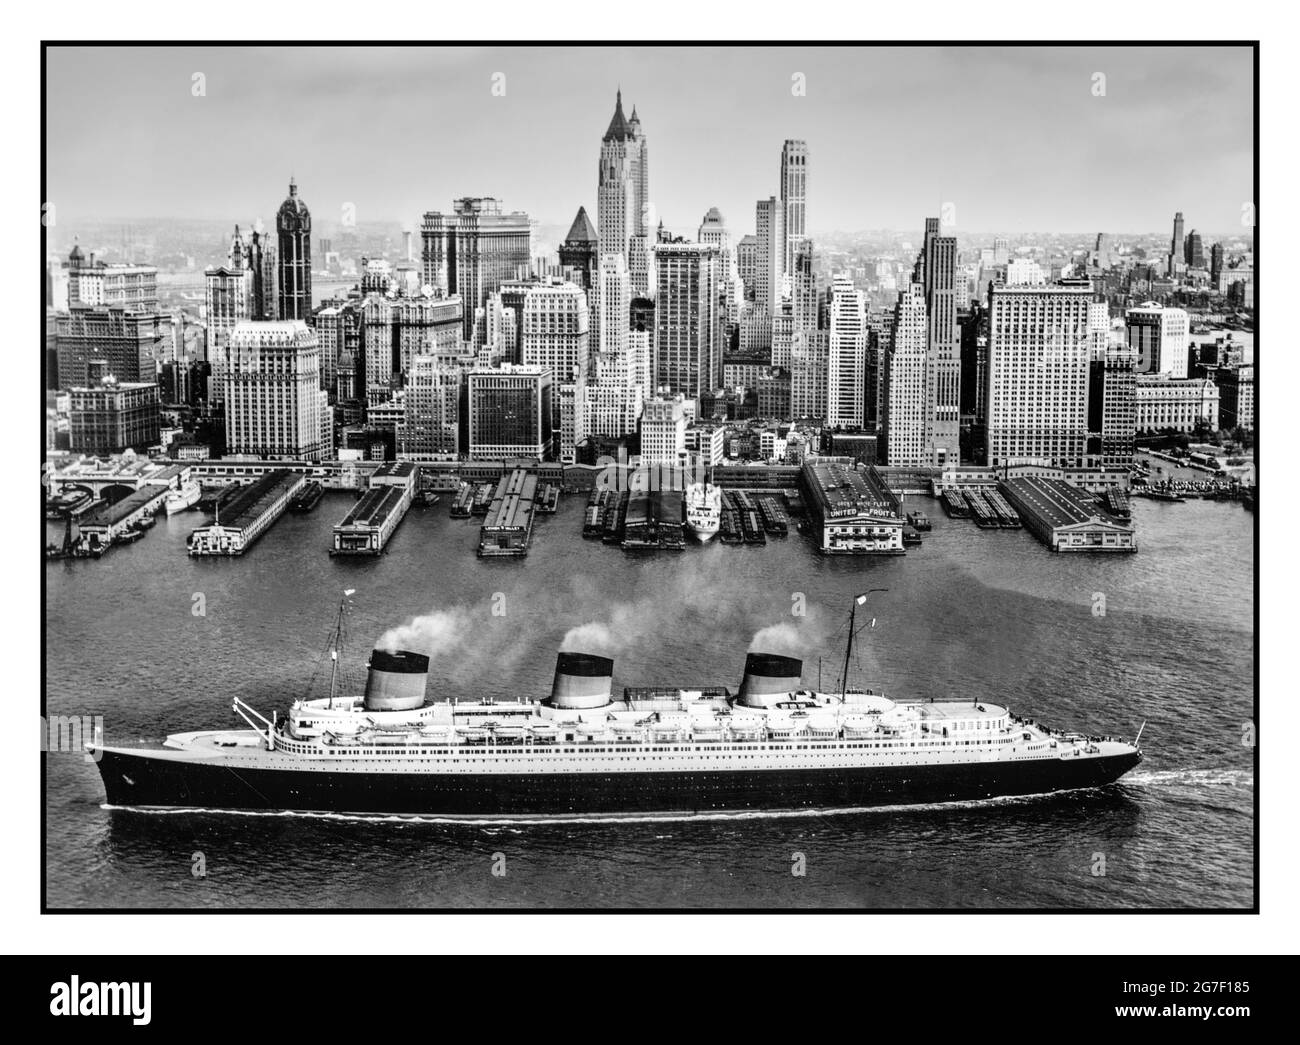 SS Normandie French Lines Vintage Travel B&W Image in New York  1936 The SS Normandie was a French ocean liner built in Saint-Nazaire, France, for the French Line Compagnie Générale Transatlantique (CGT). She entered service in 1935 as the largest and fastest passenger ship afloat, crossing the Atlantic in a record 4.14 days, and remains the most powerful steam turbo-electric-propelled passenger ship ever built. Stock Photo